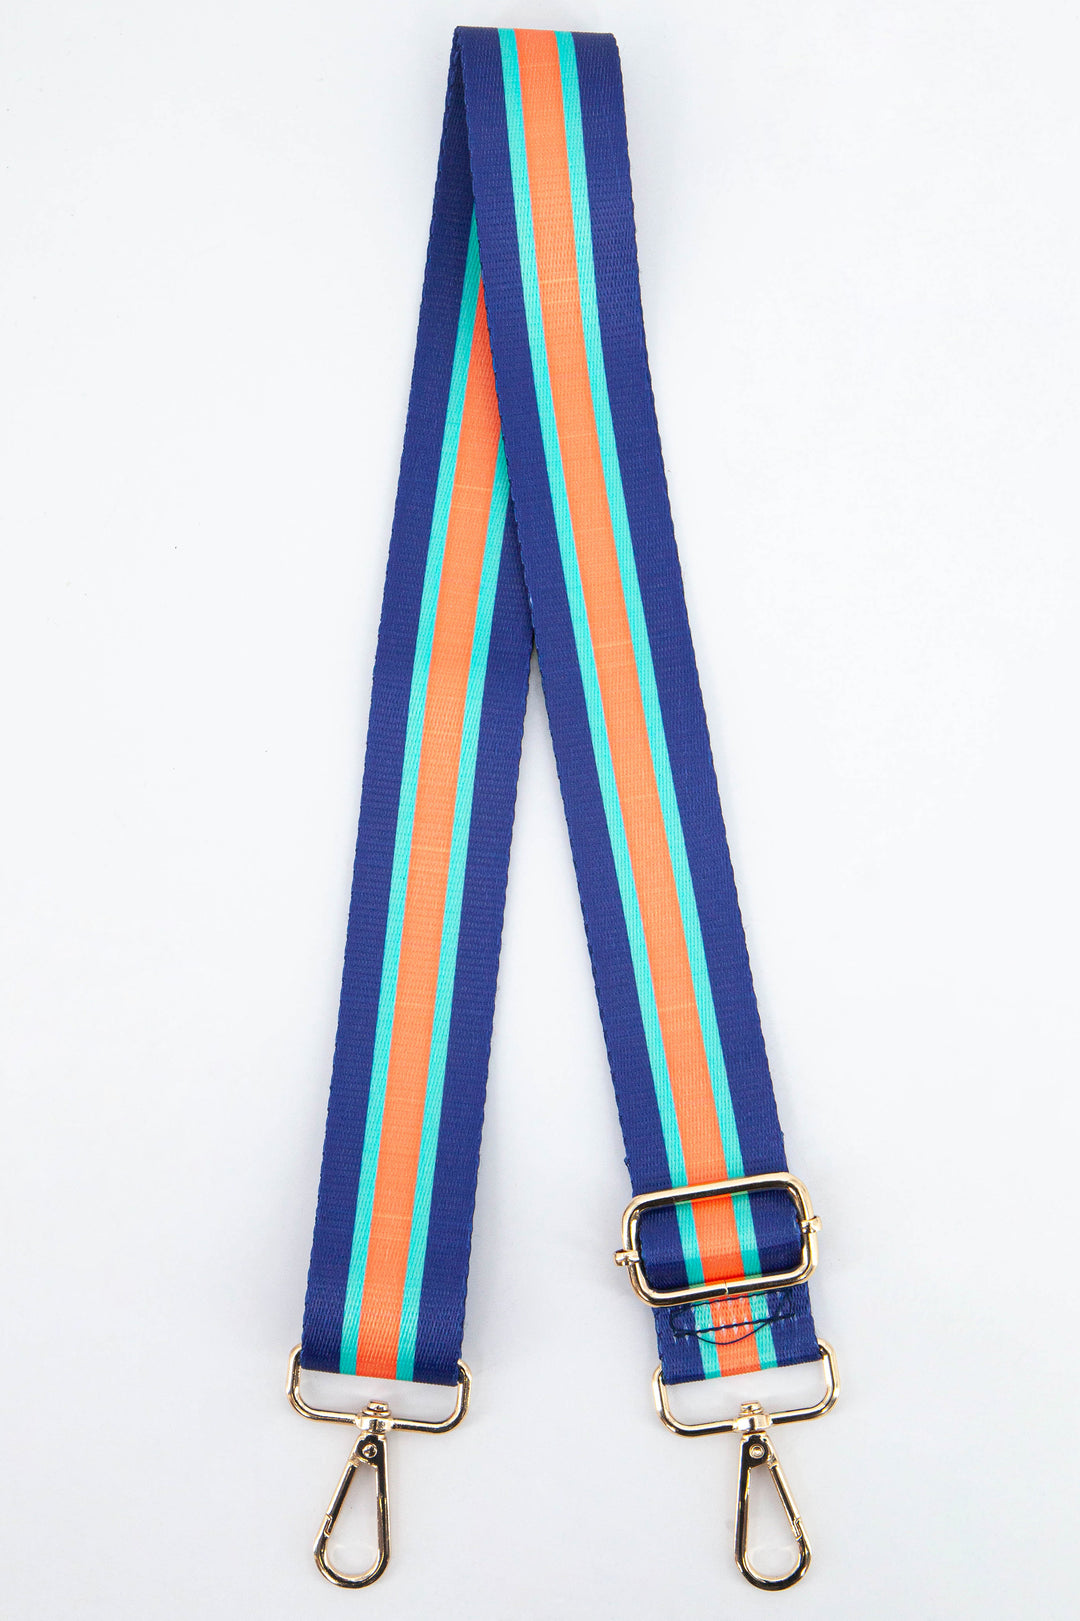  blue and orange contrasting colour block stripe bag strap with gold clip on snap hook attachments